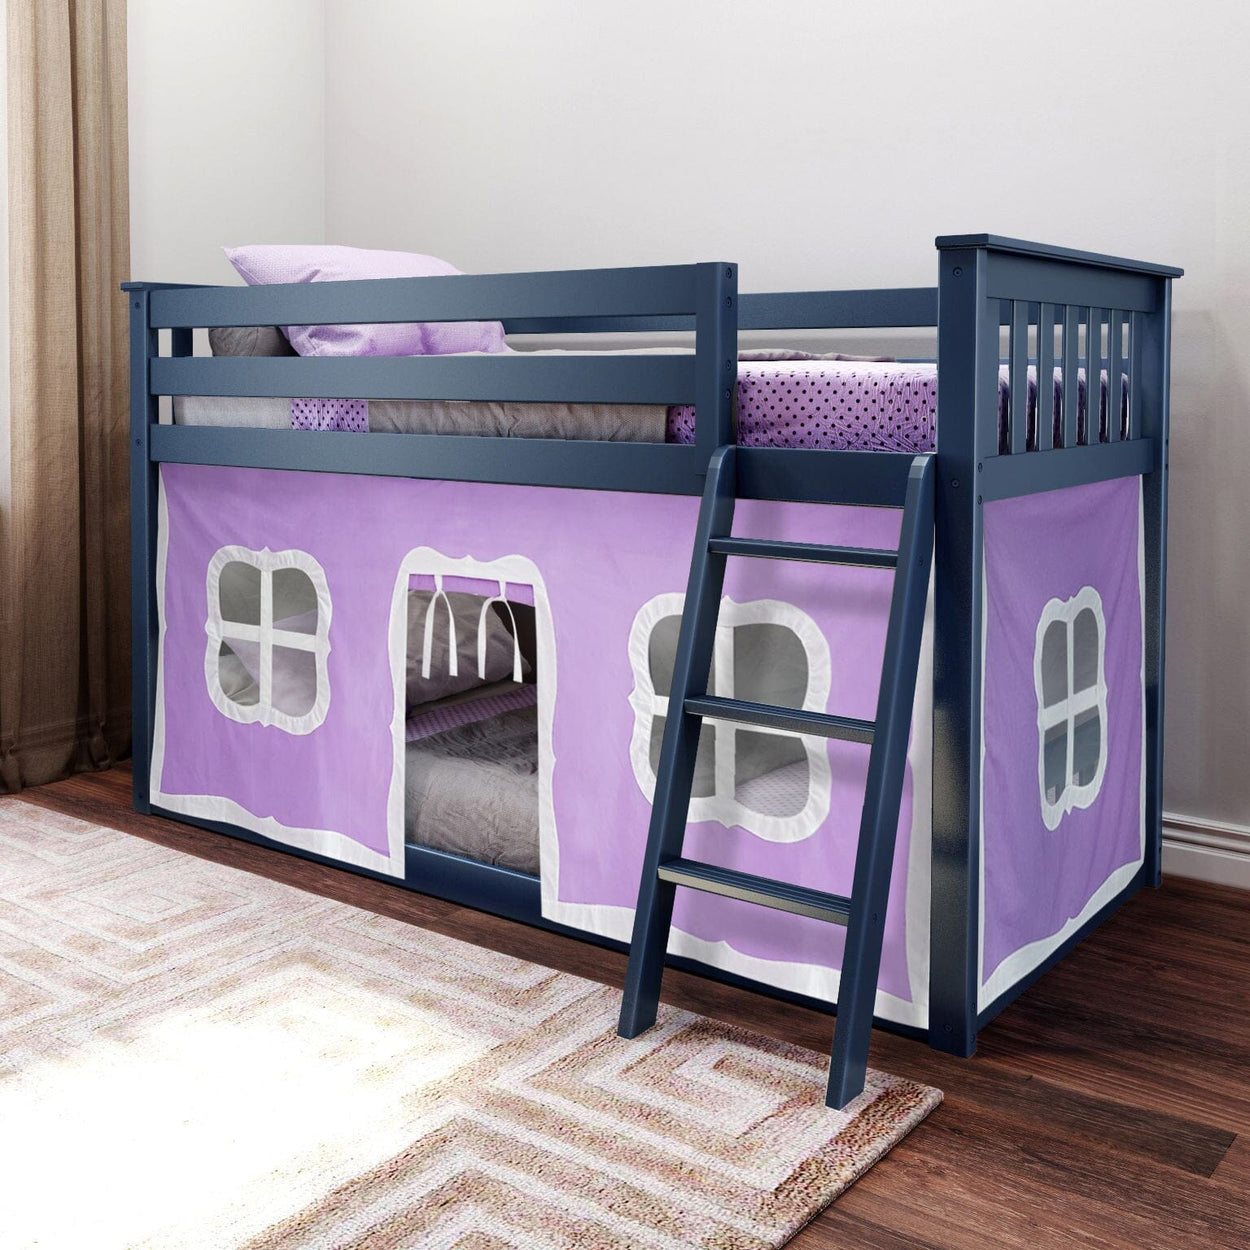 Bunk Beds Max & Lily Twin-Size Low Bunk Bed + Curtain Blue Purple 